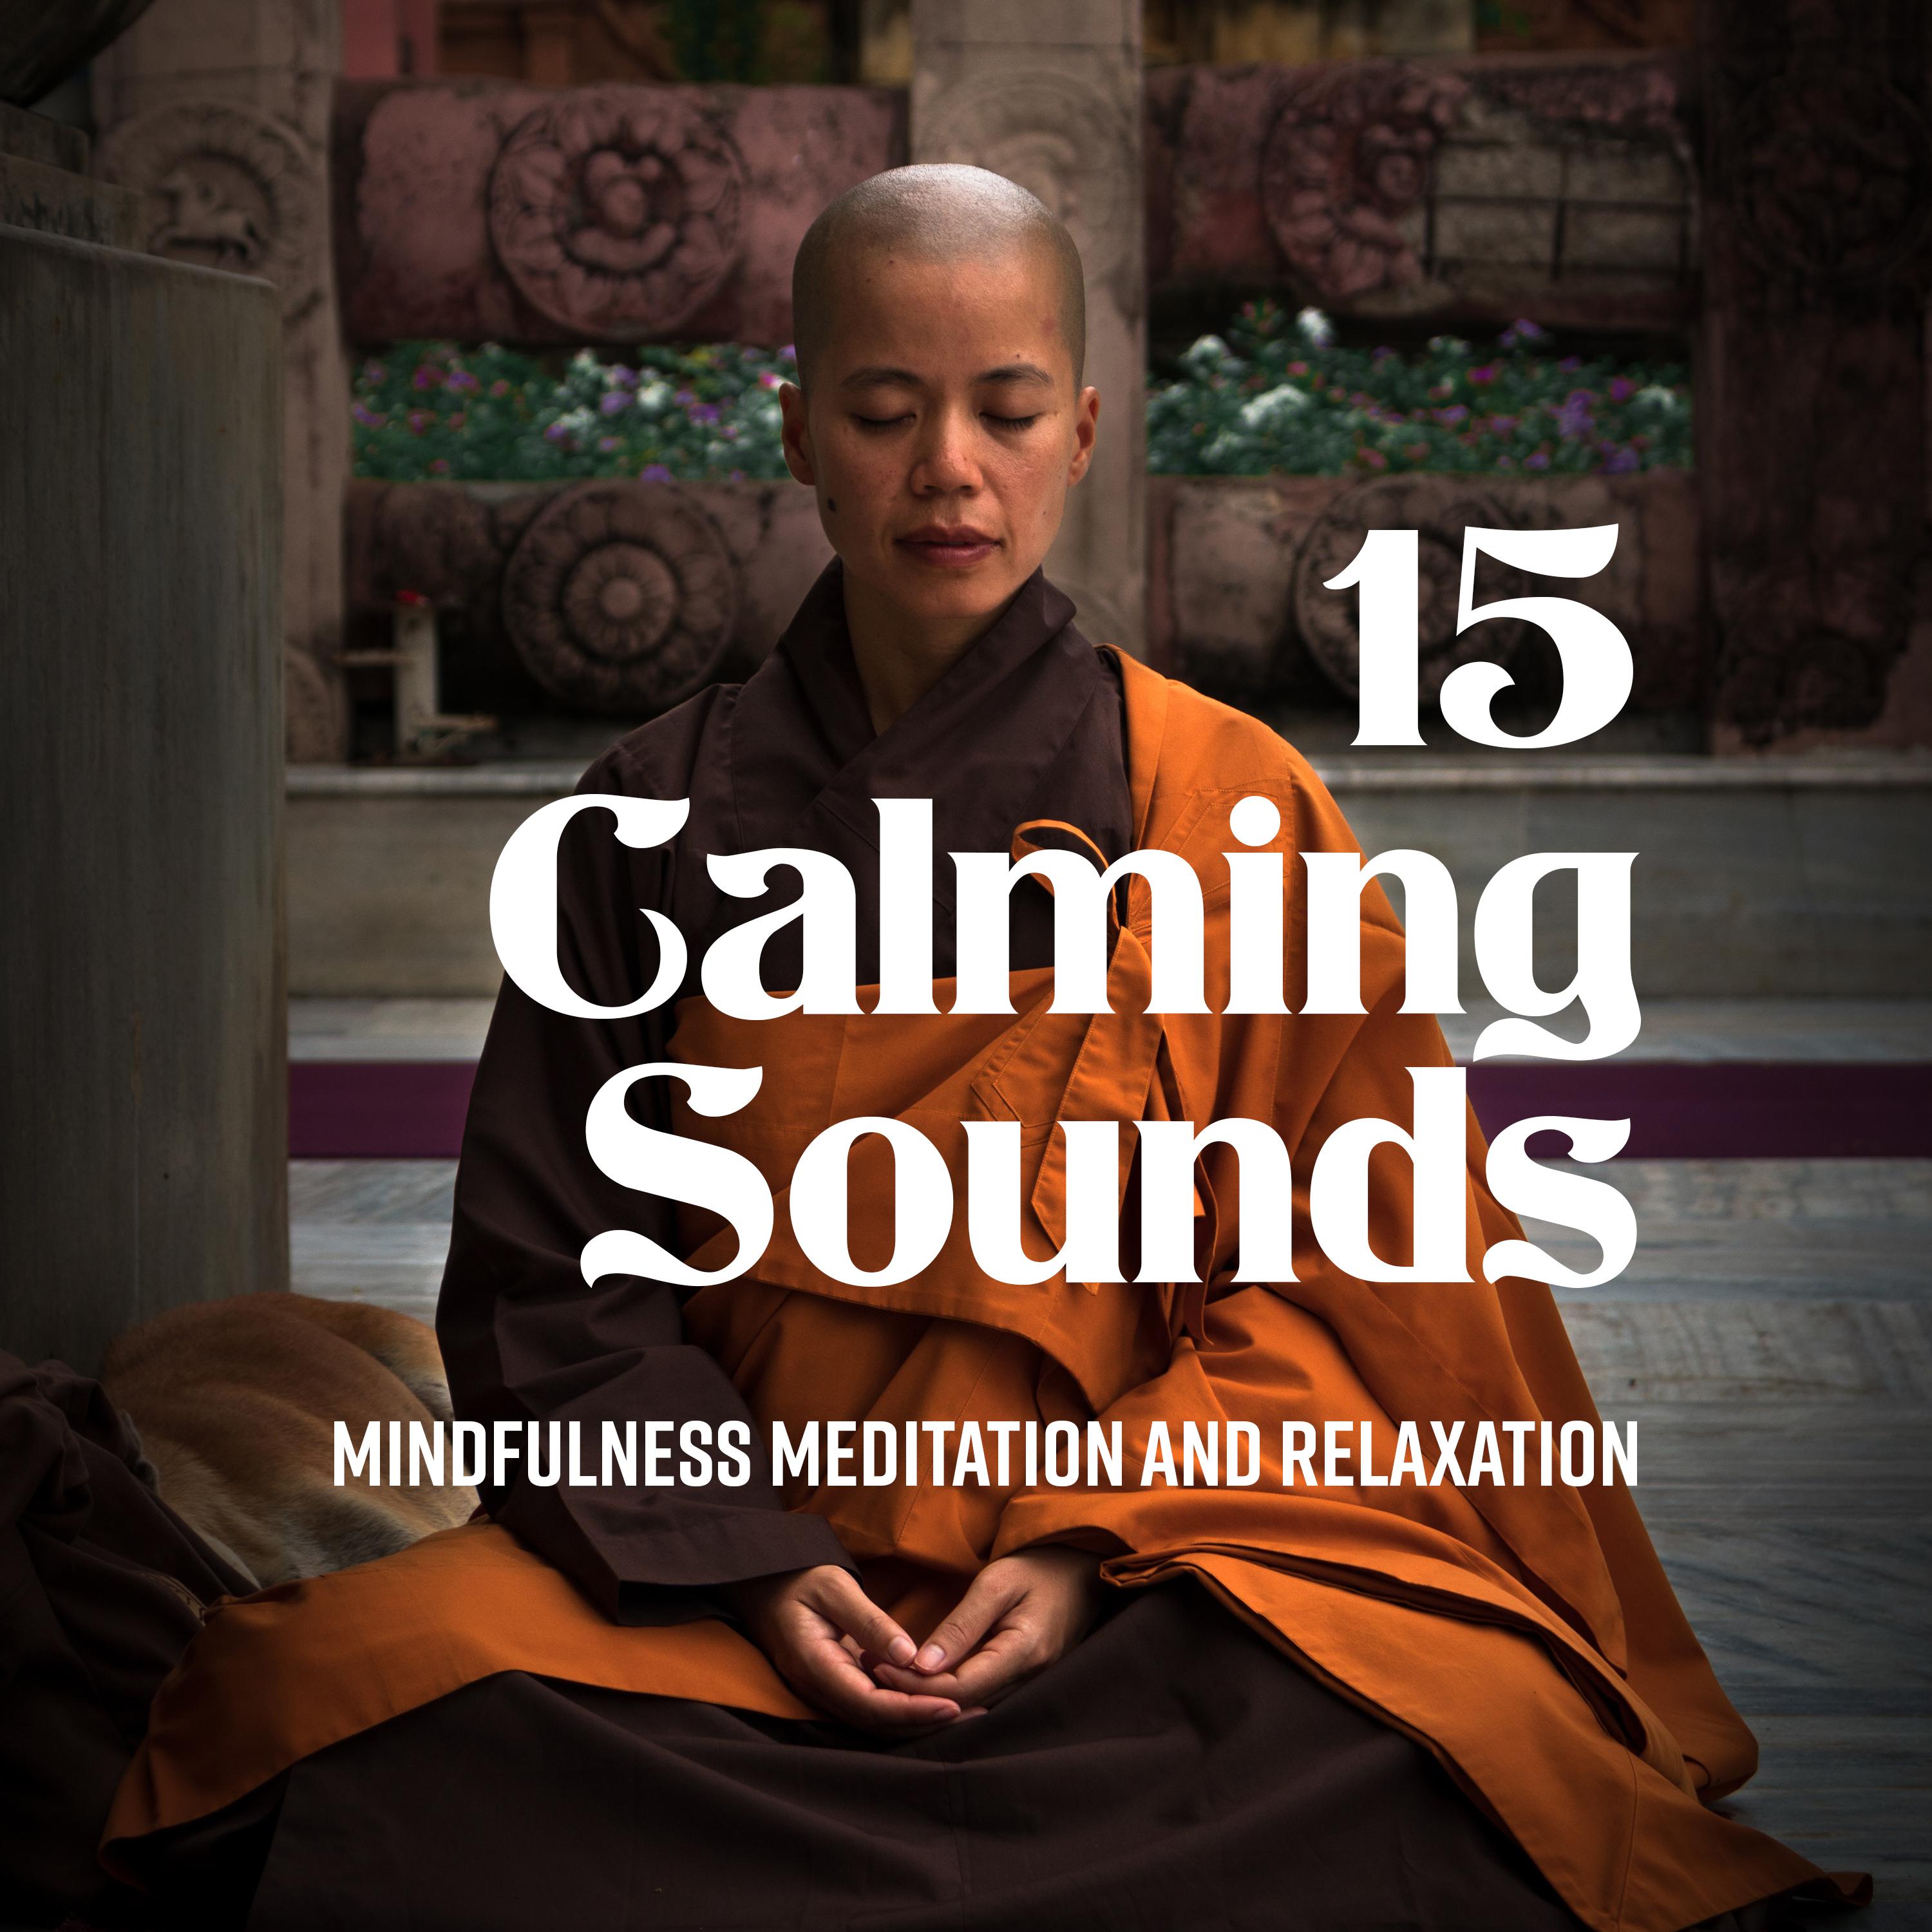 15 Calming Sounds (Mindfulness Meditation and Relaxation)